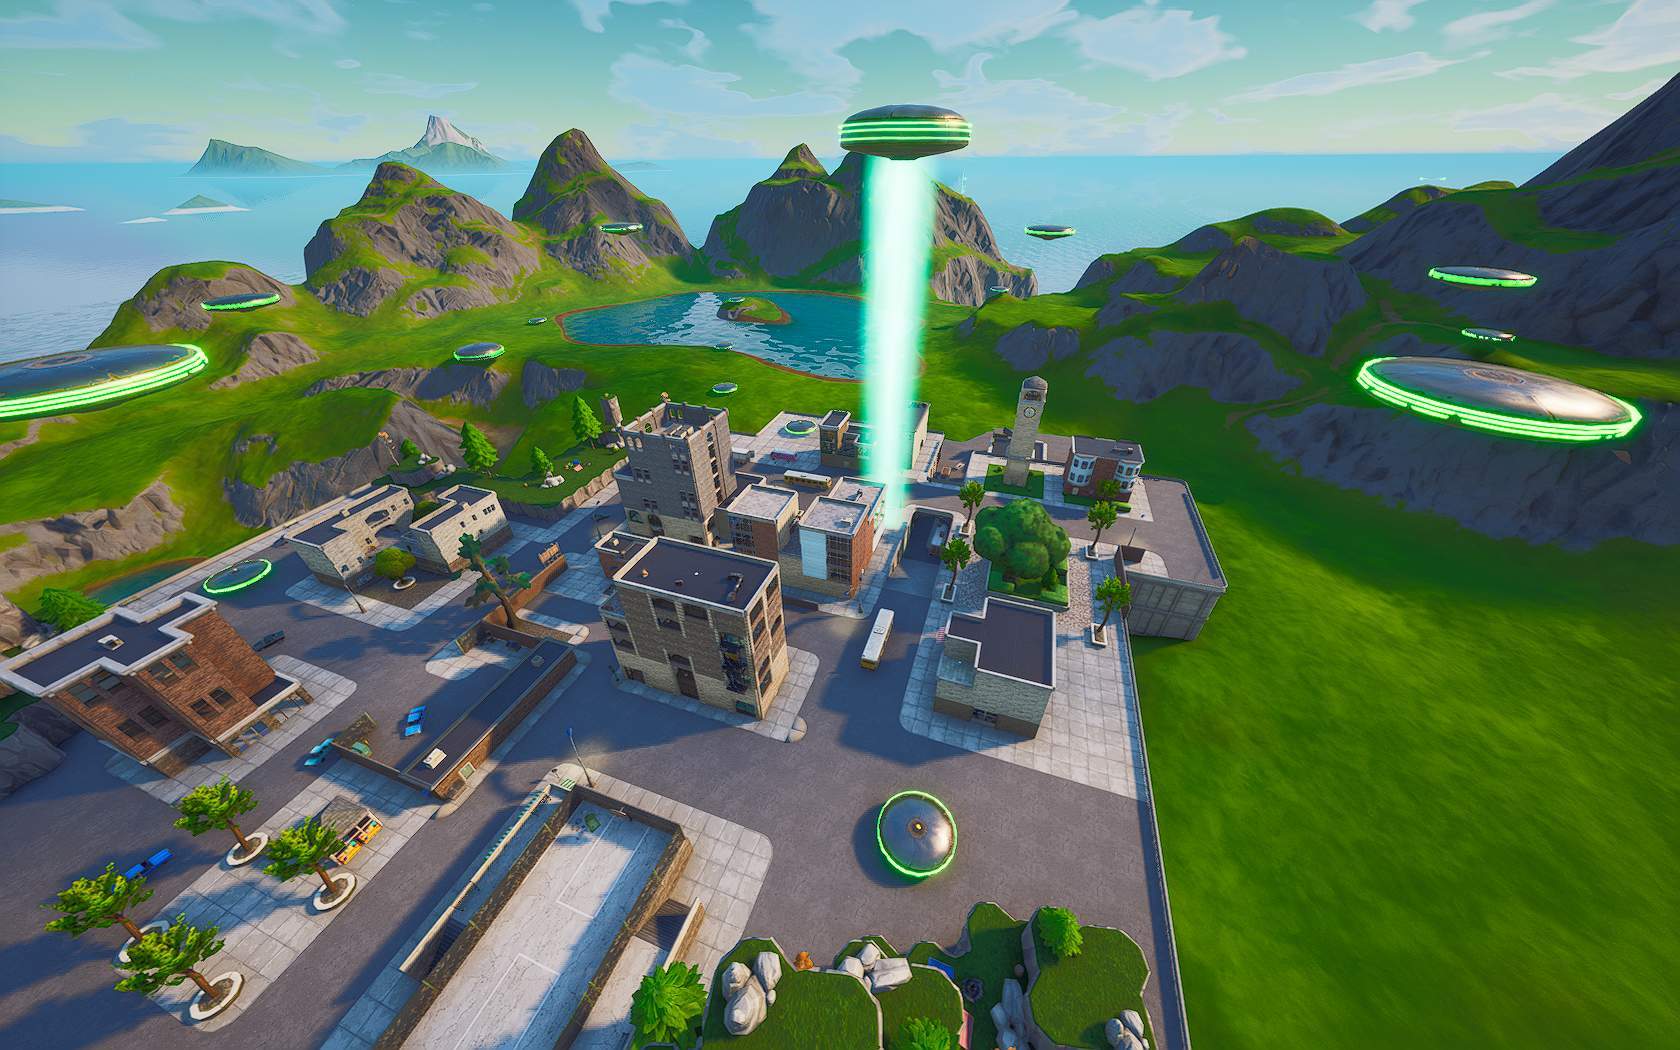 TILTED TOWERS / ZONEWARS 50 PLAYERS